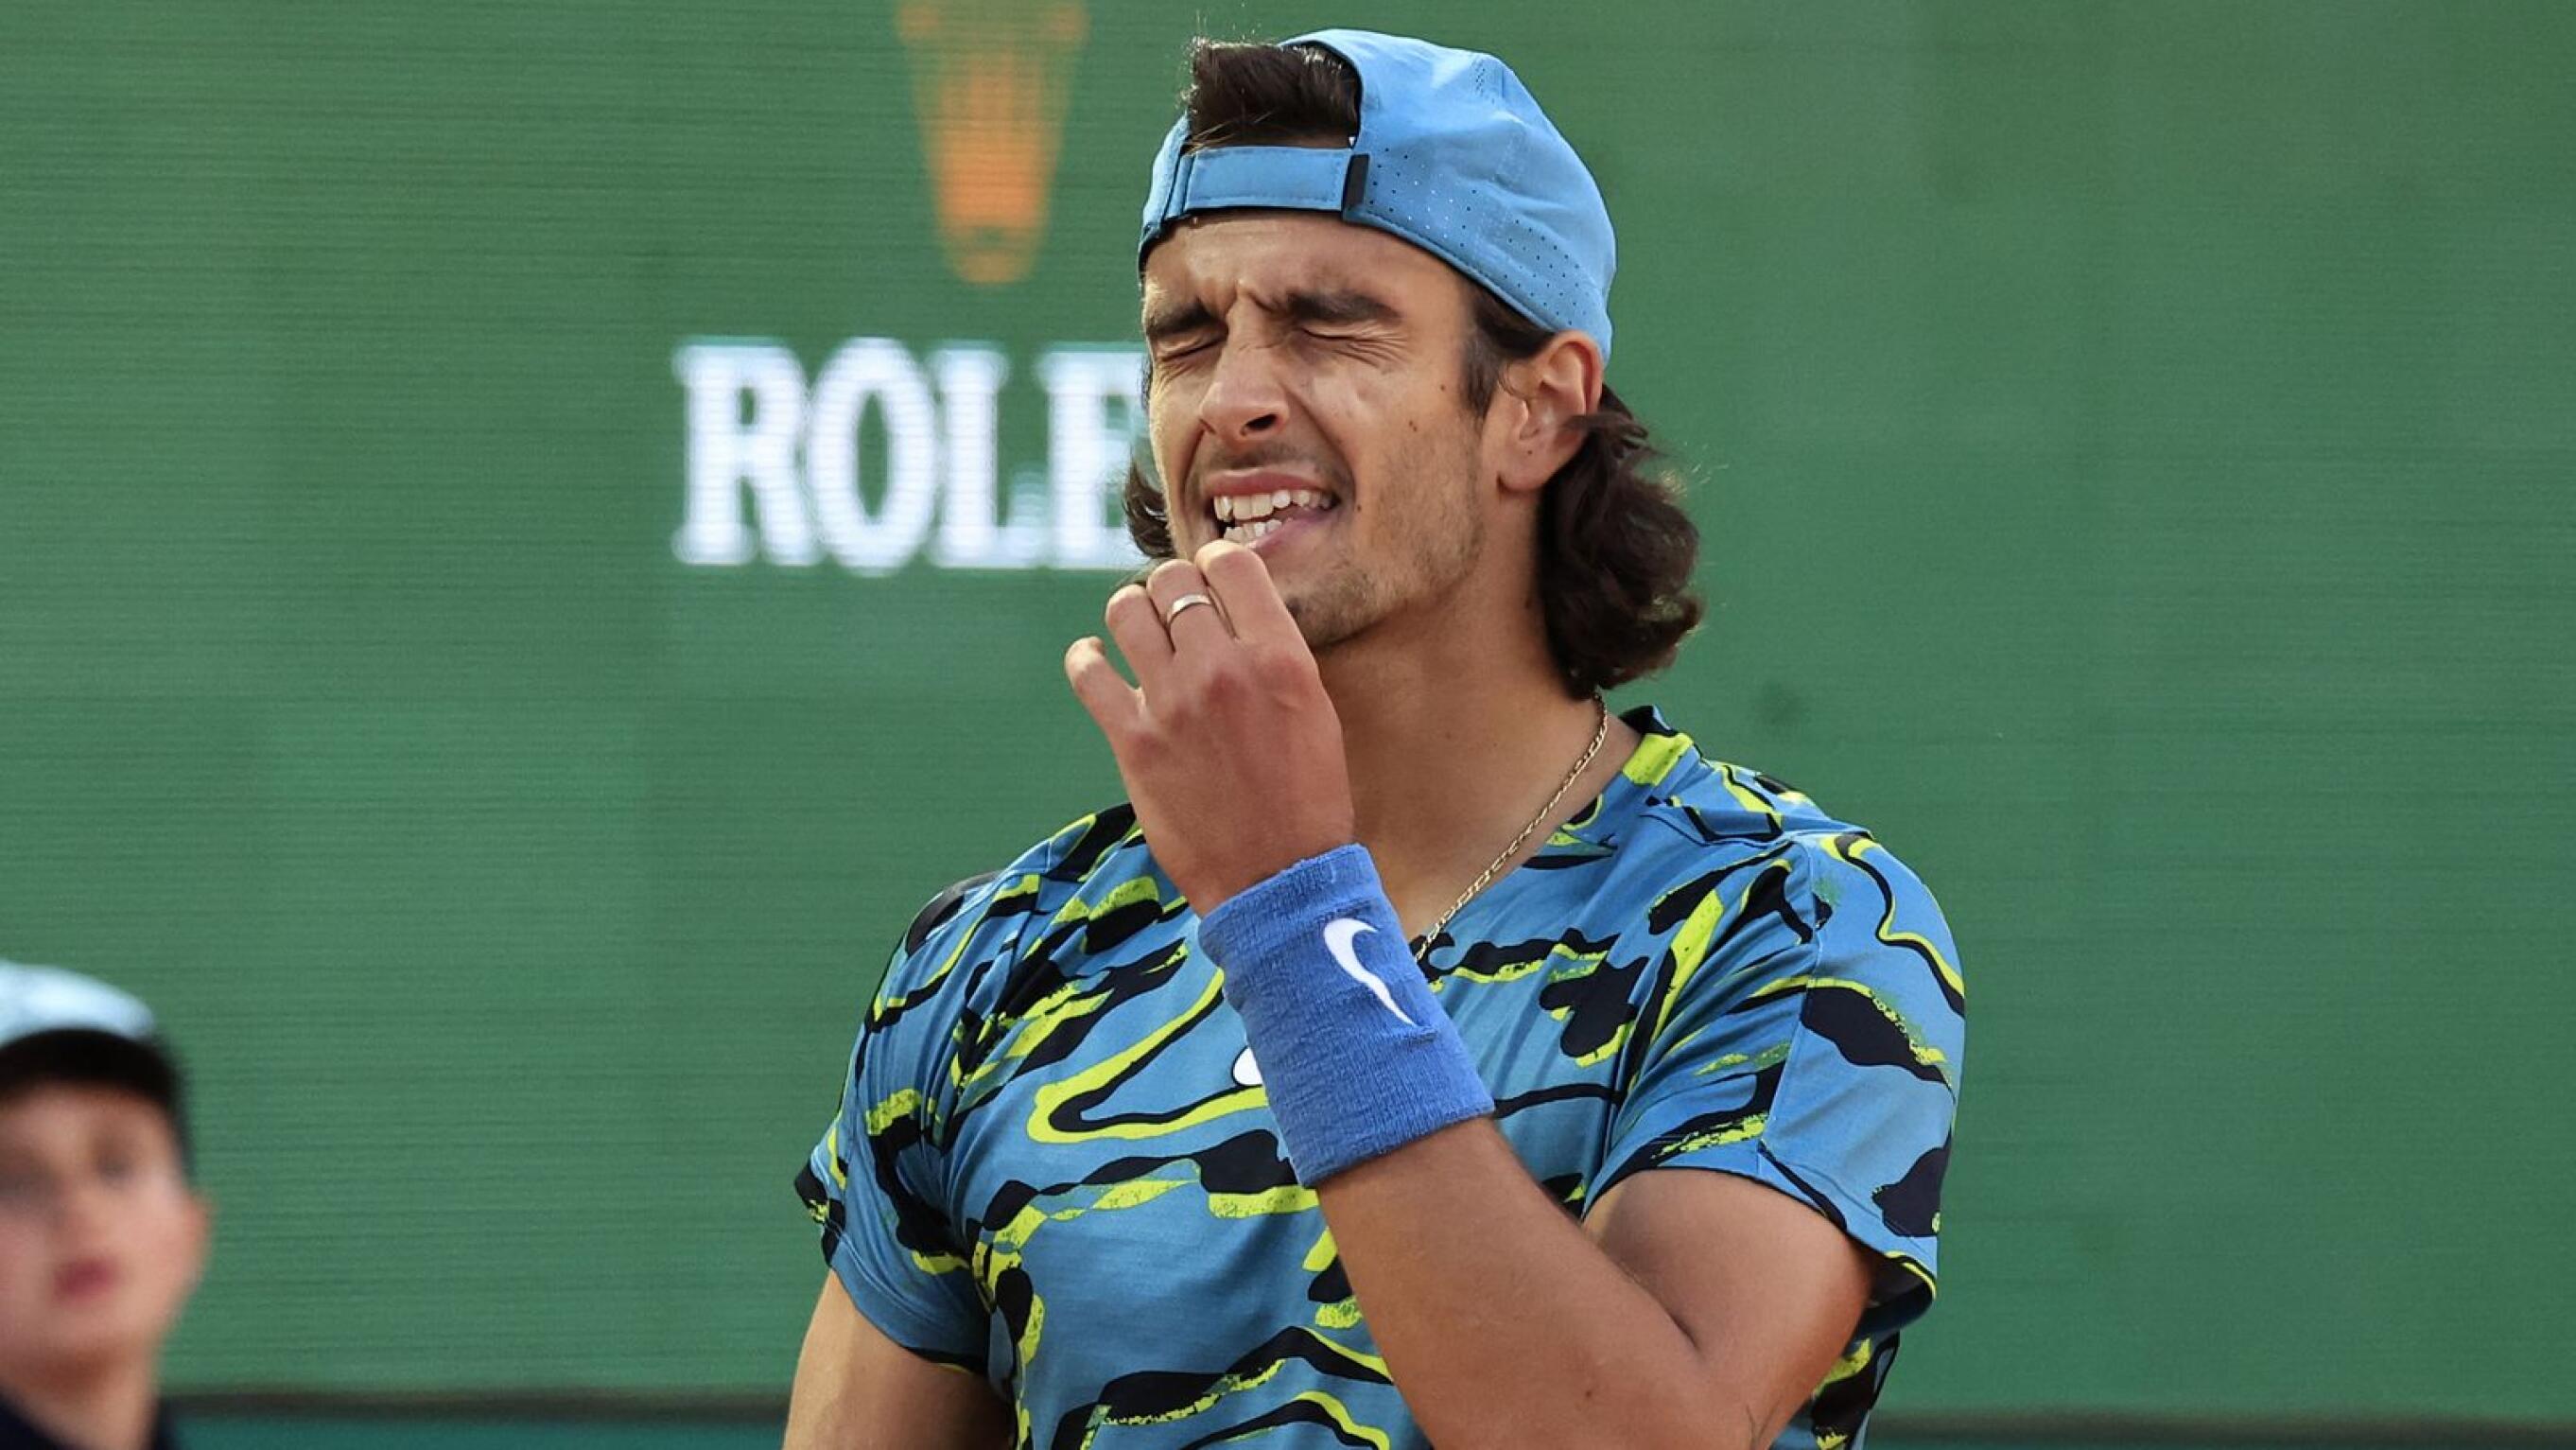 Italy's Lorenzo Musetti reacts during his match against Serbia's Novak Djokovic at the  Monte-Carlo ATP Masters Series tournament Round of 16 in Monte Carlo on Thursday